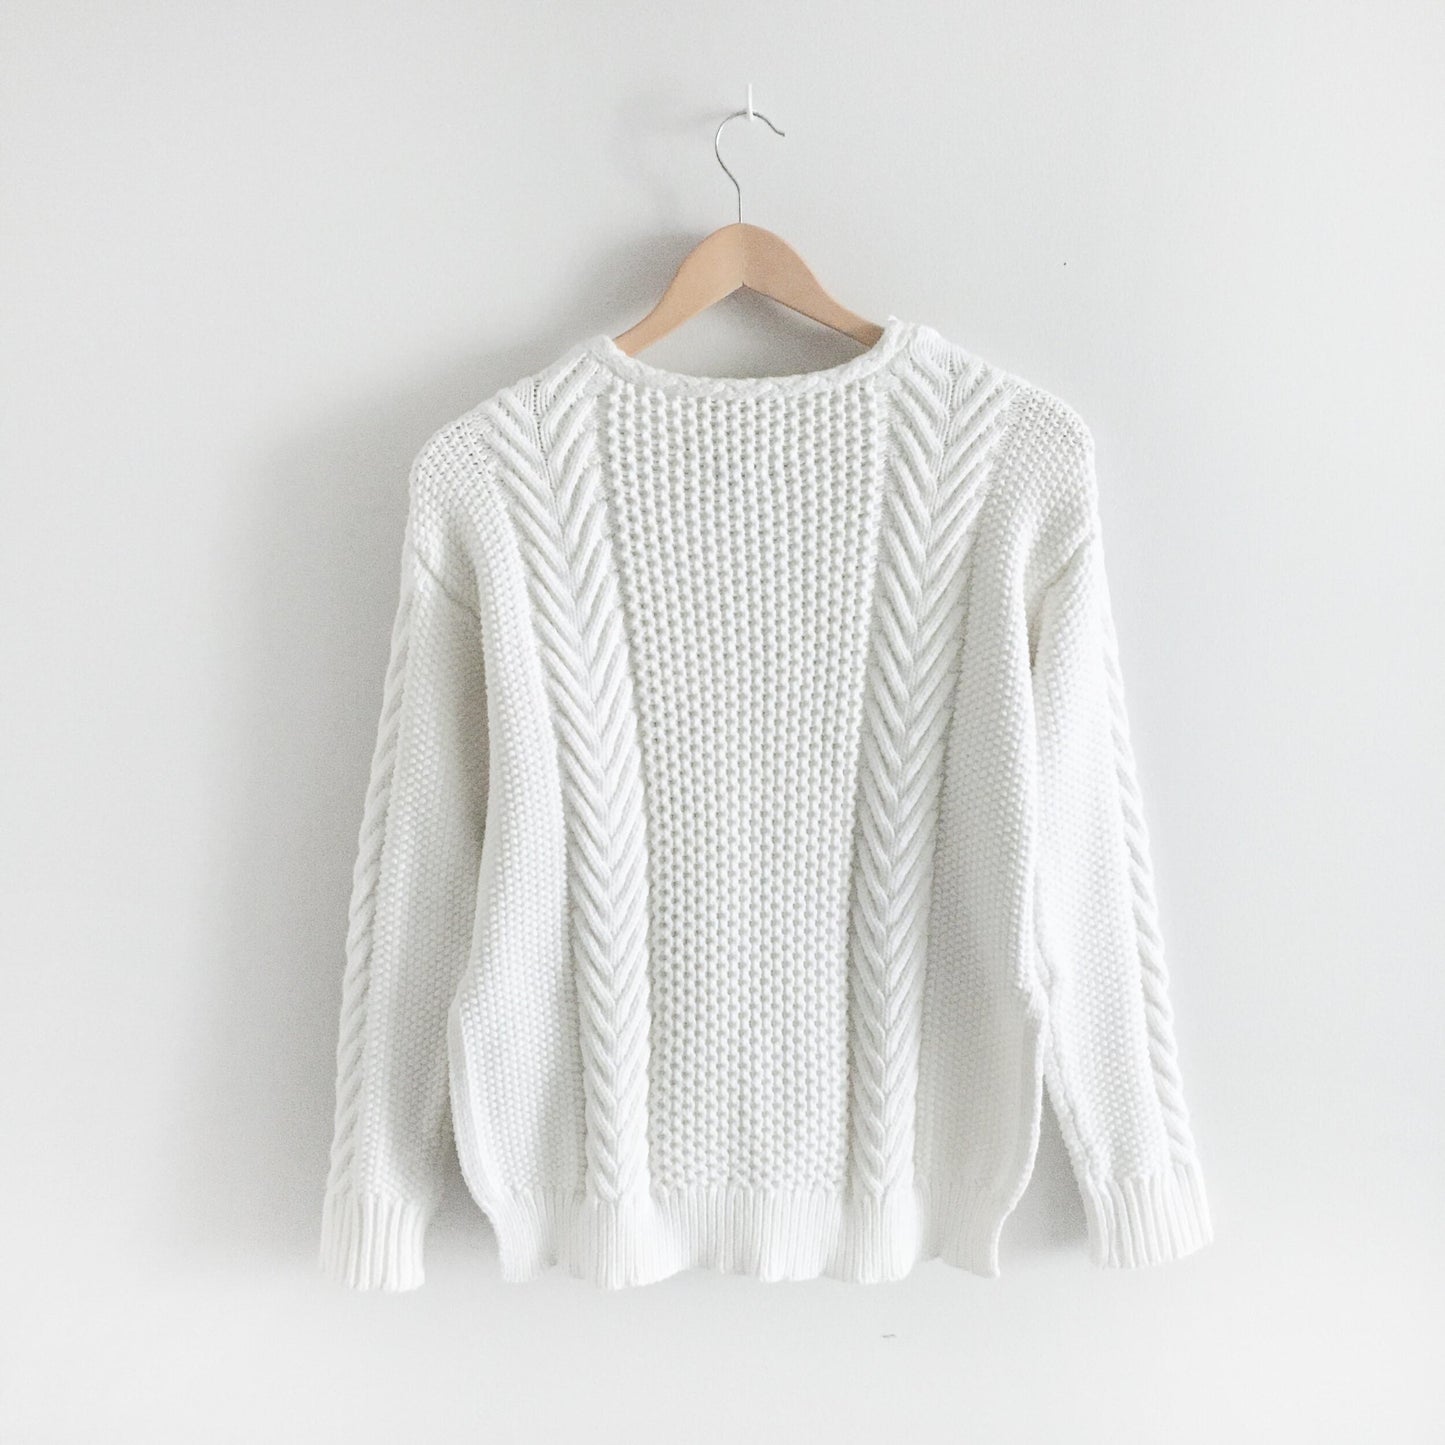 saylor adeline sweater in shell - size xs